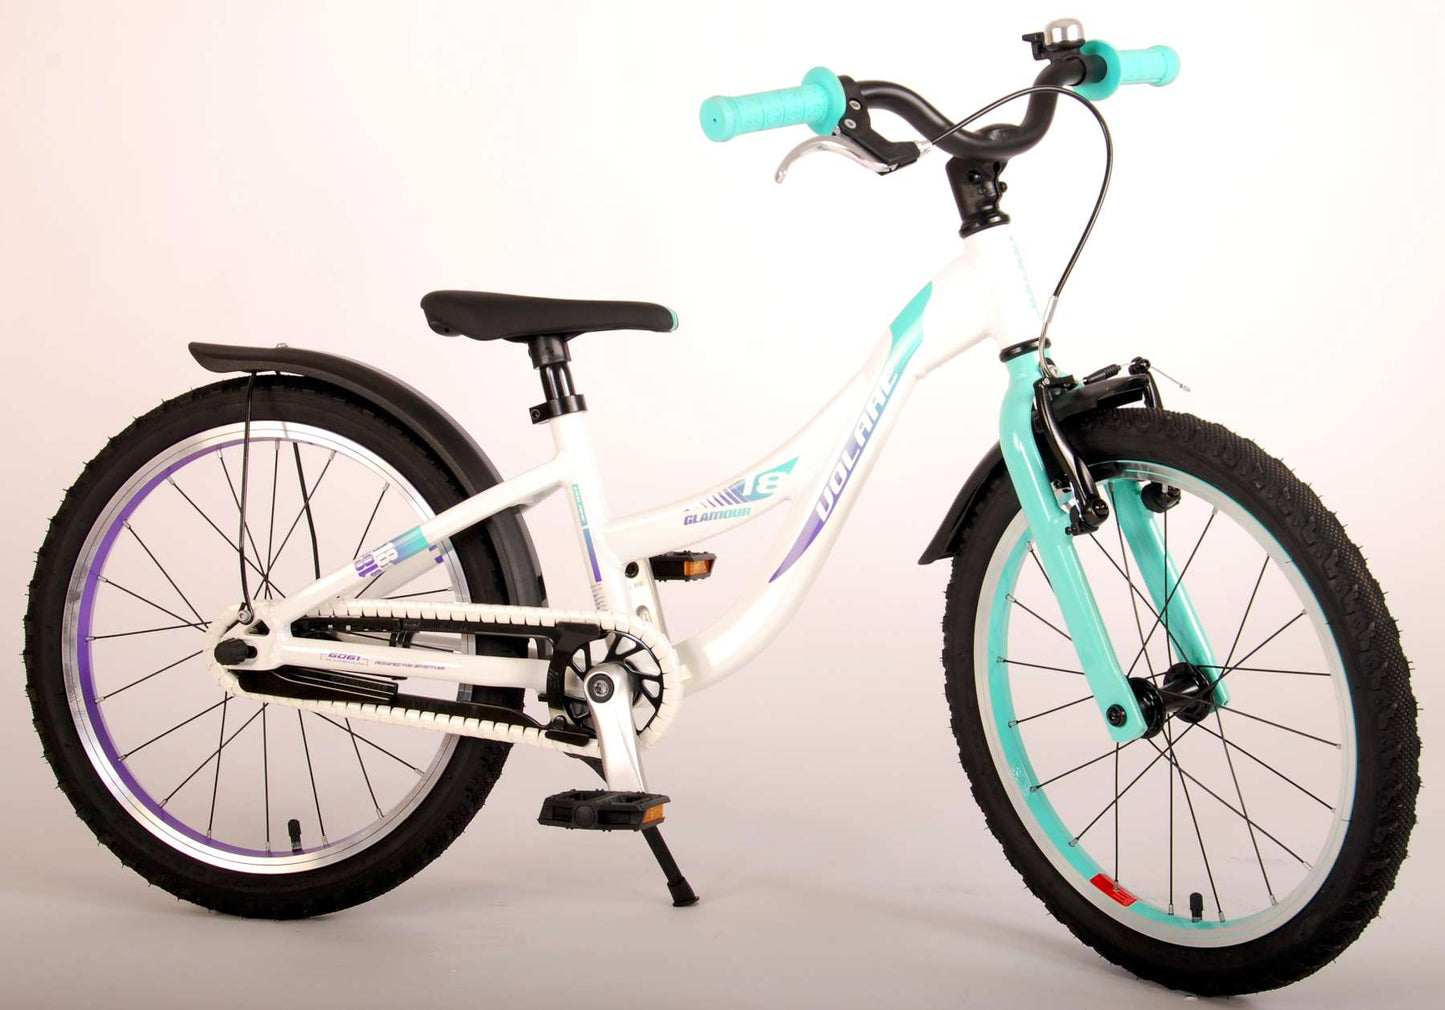 Bicycle per bambini Glamour Vlatare - Girls - 18 pollici - White Mint Green - Prime Collection